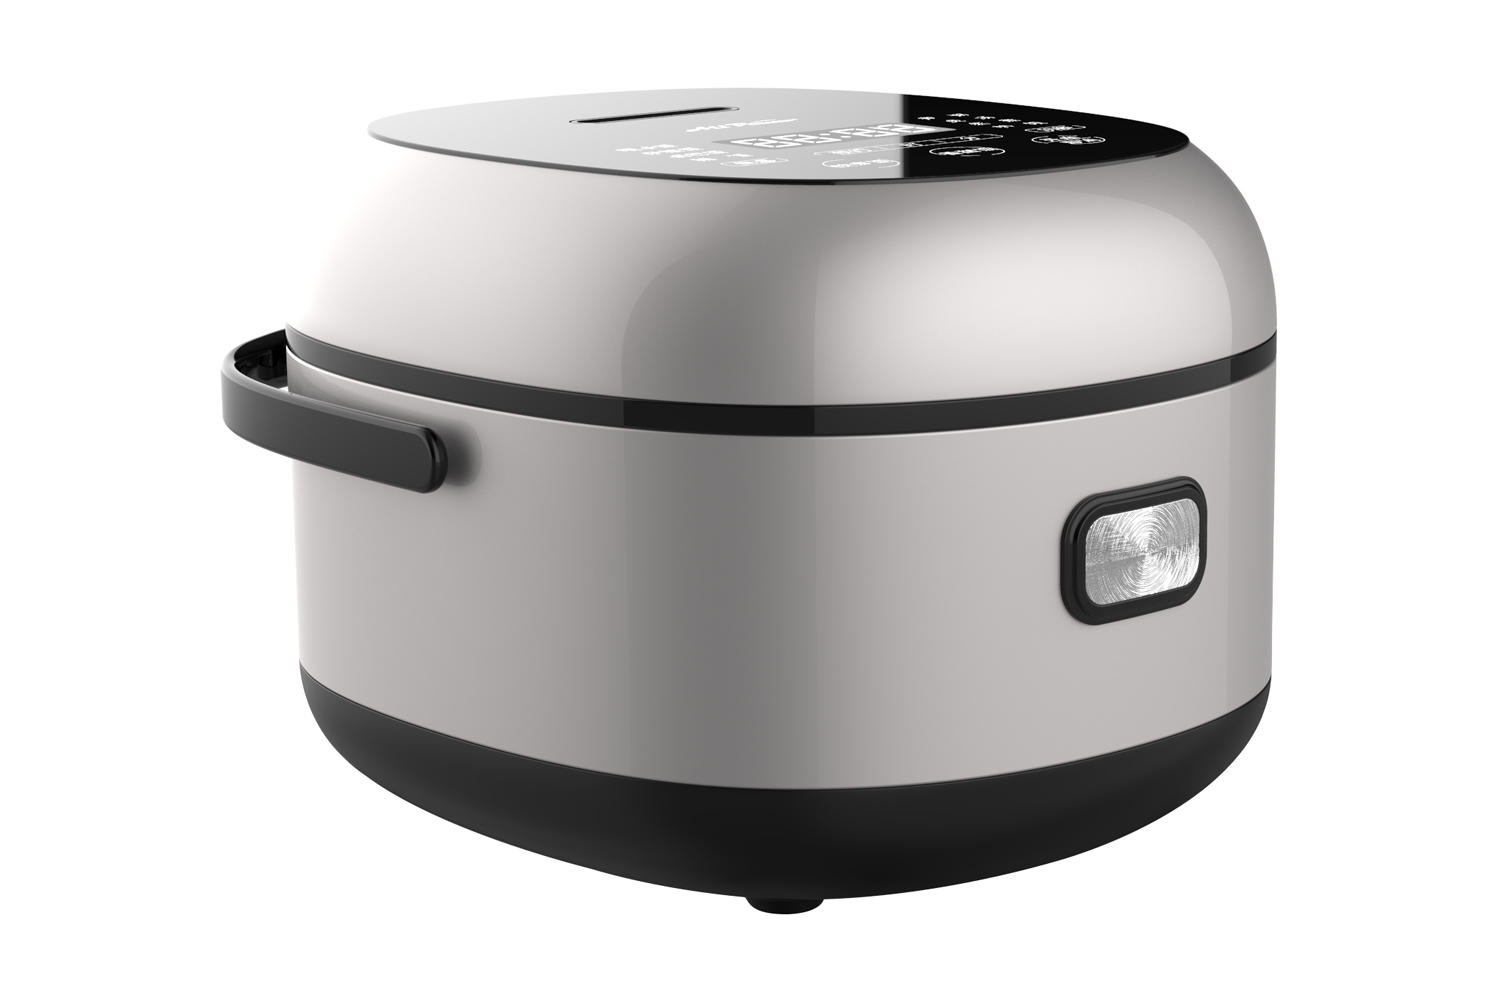 YYF-30FH01 3L Multifunction IH Rice Cooker, 10 Menu, 24 Hours Time Setting, Steam, Soup